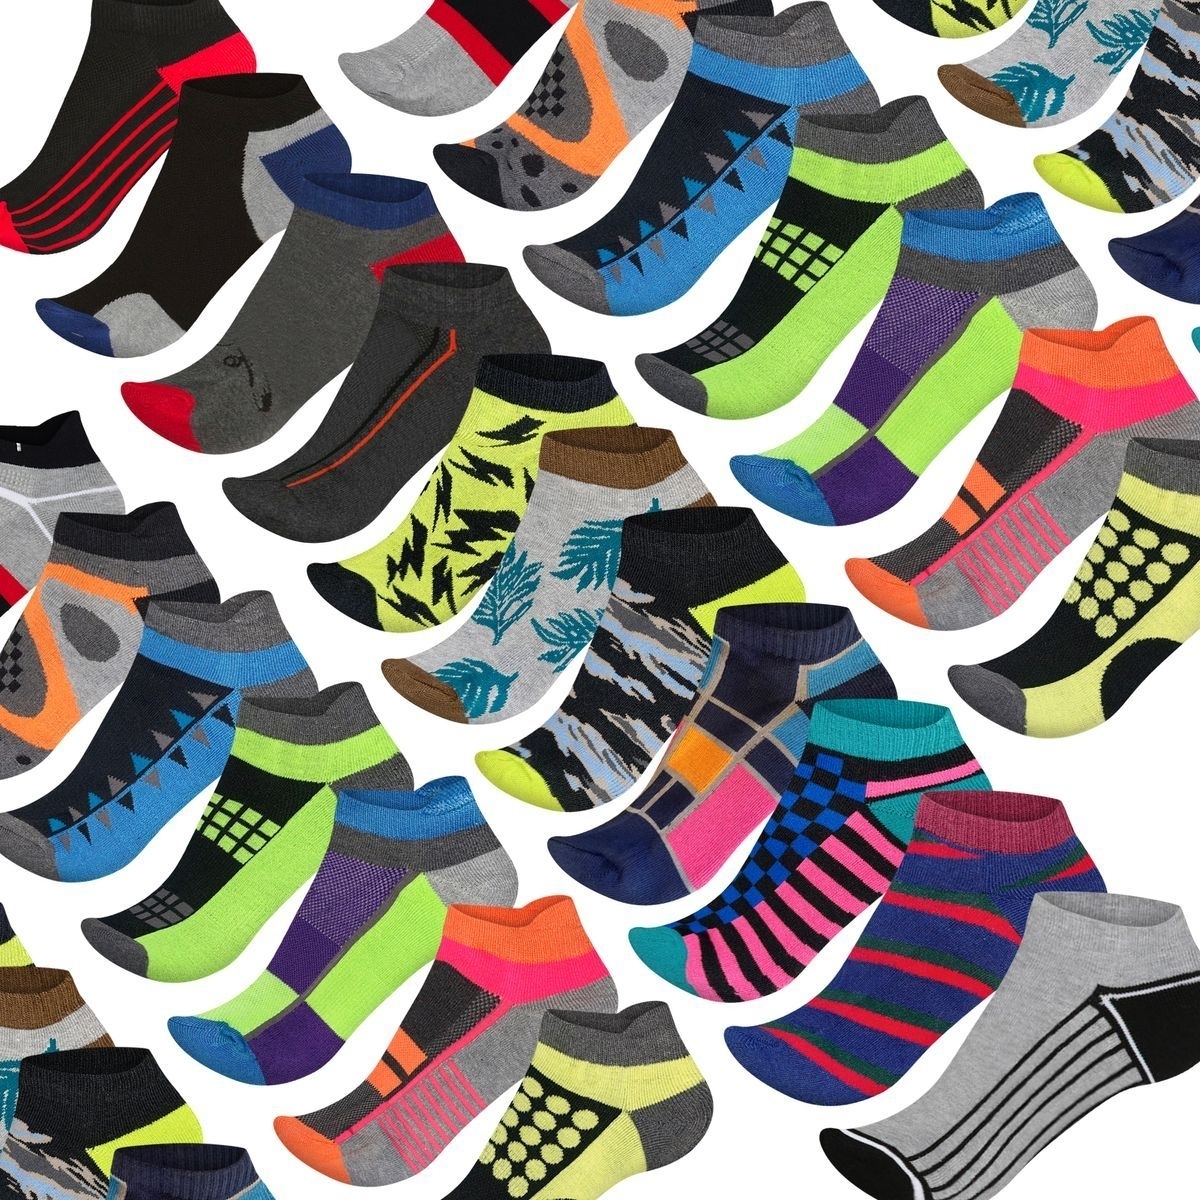 24-Pairs: Men's Moisture Wicking Mesh Performance Ankle Low Cut Cushion Athletic Sole Socks